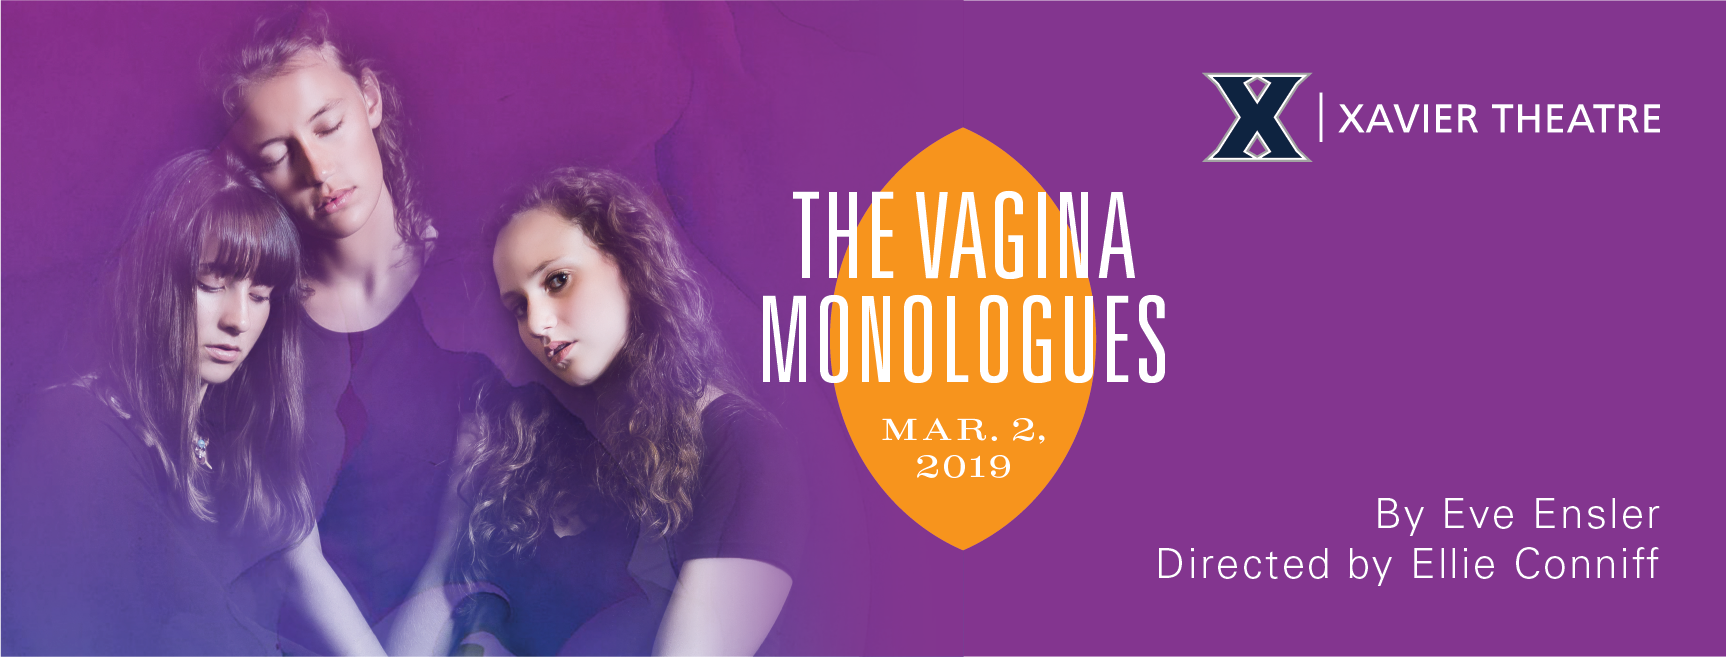 Poster for The Vagina Monologies play, with three women